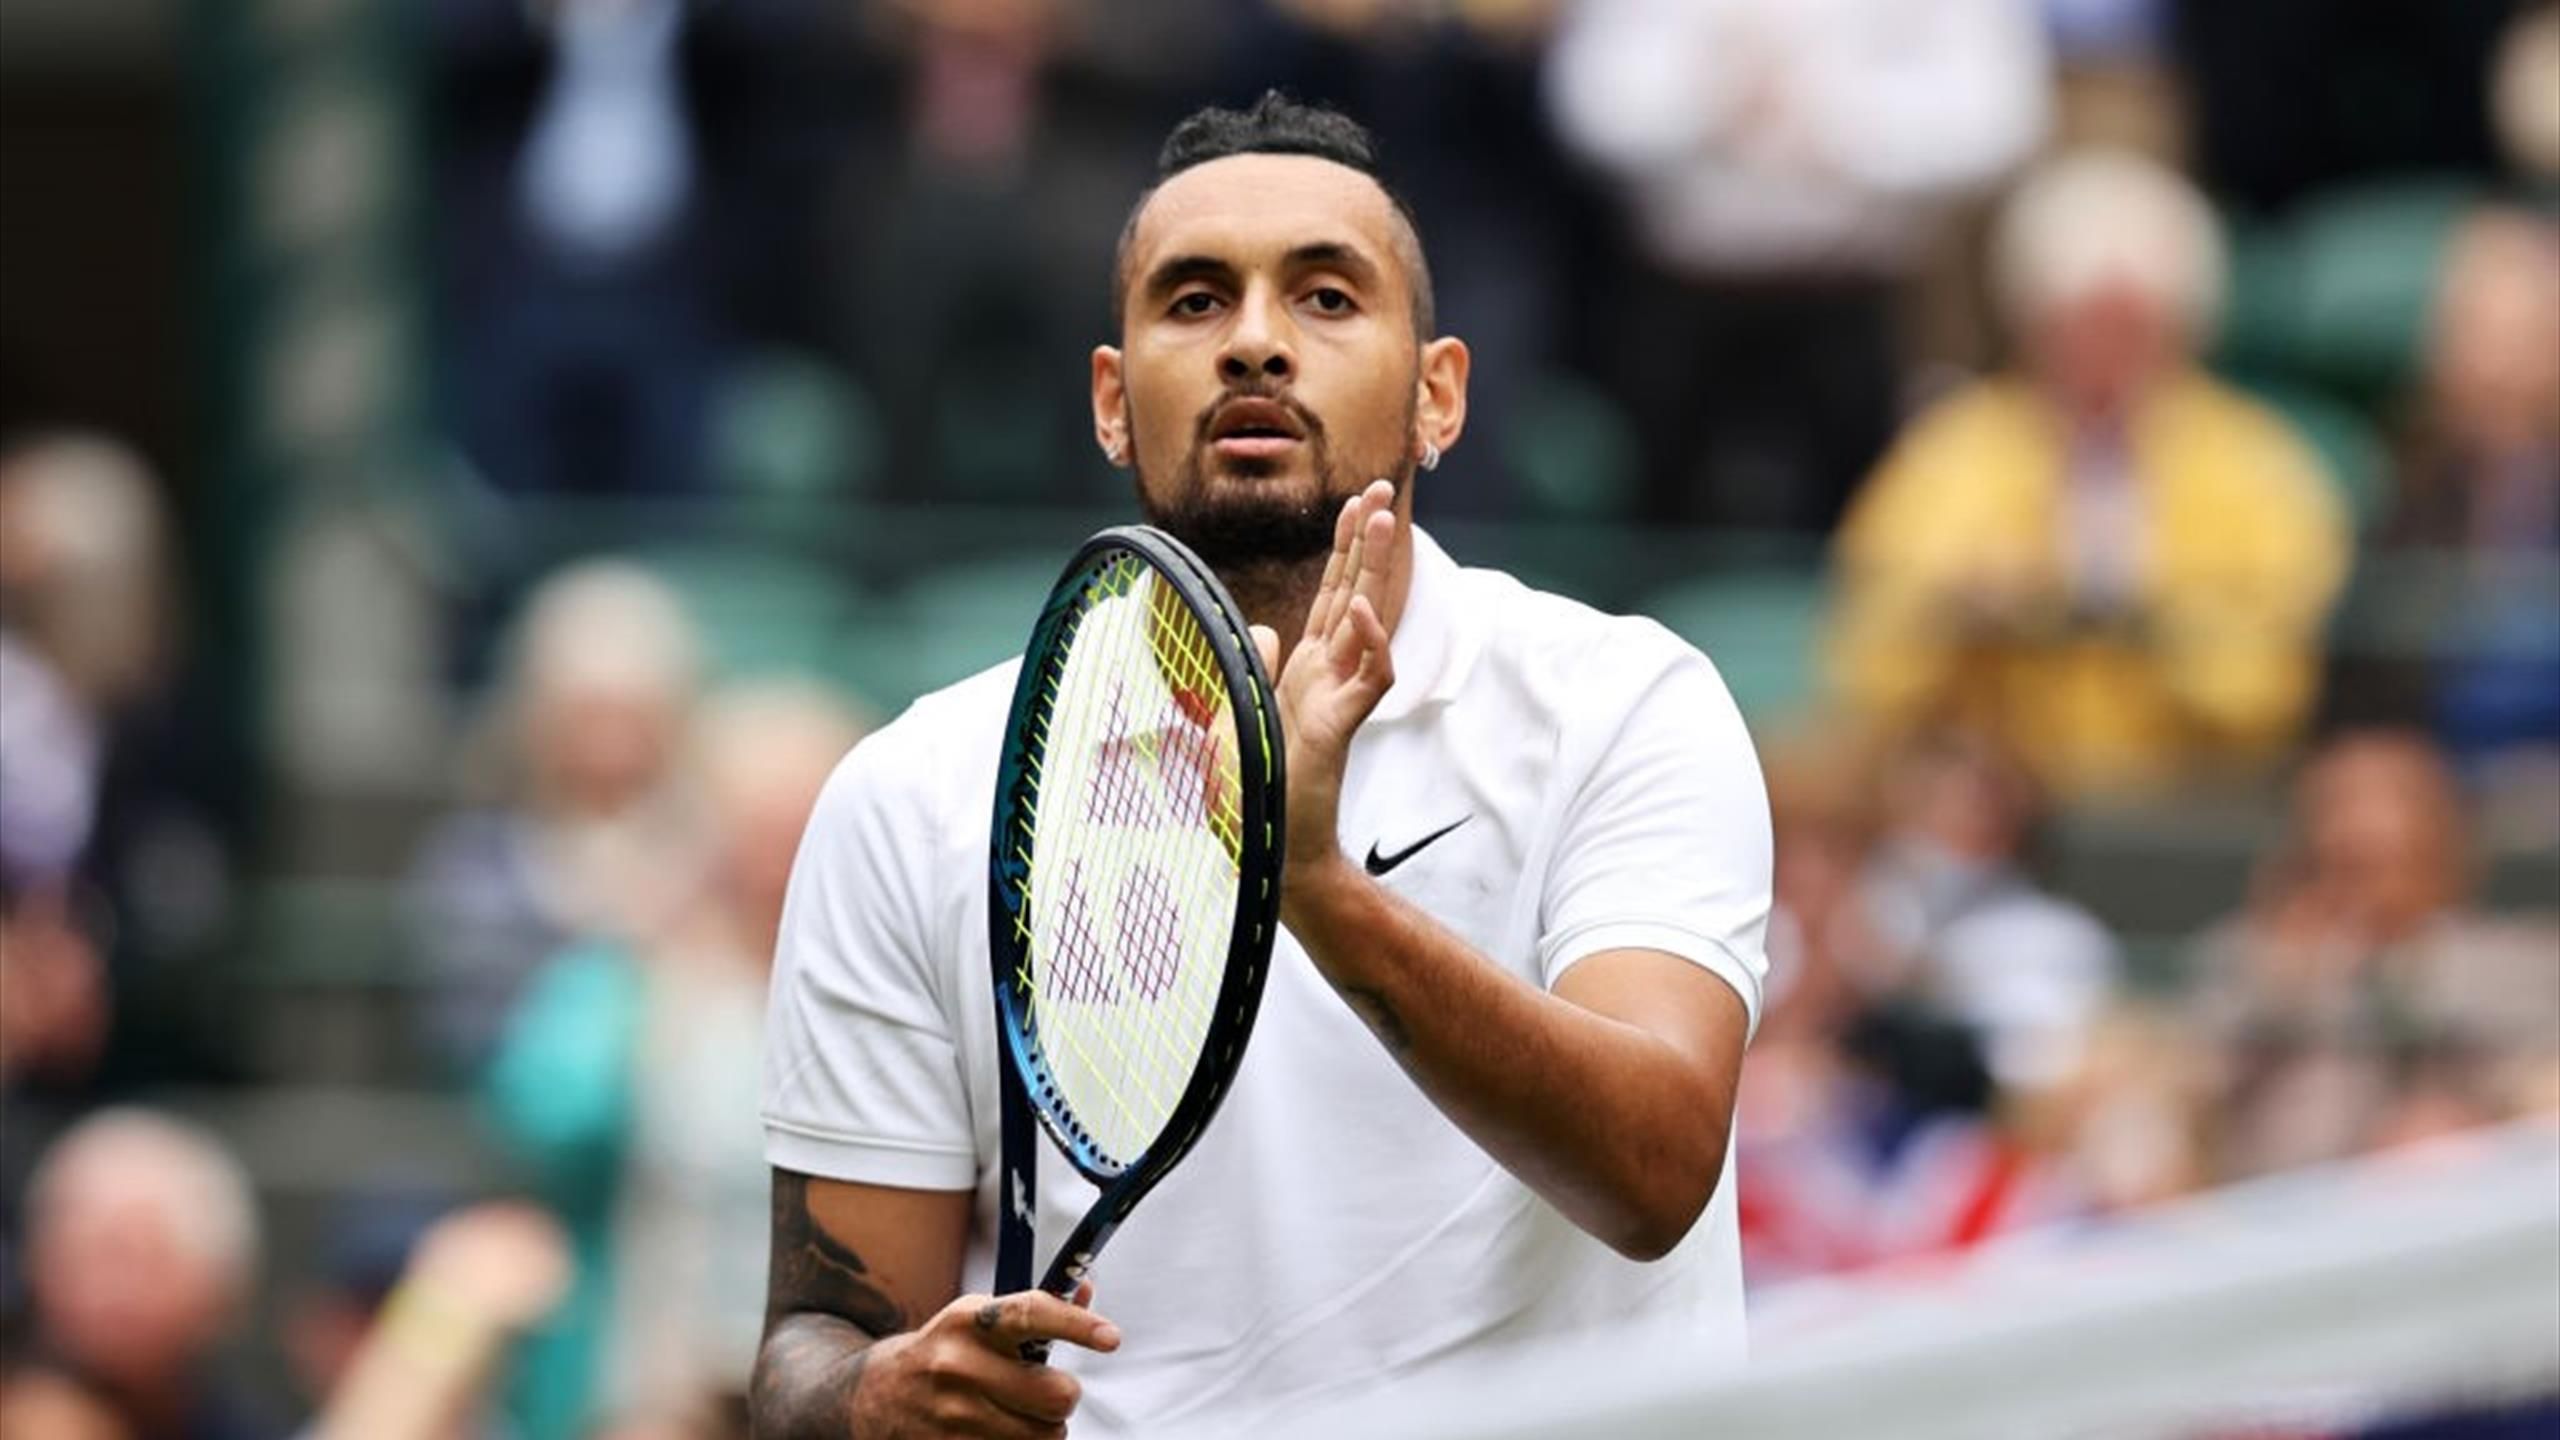 Mallorca Open: Nick Kyrgios suffers huge blow in Wimbledon 2022 preparations, pulls out of Mallorca event citing abdominal pain